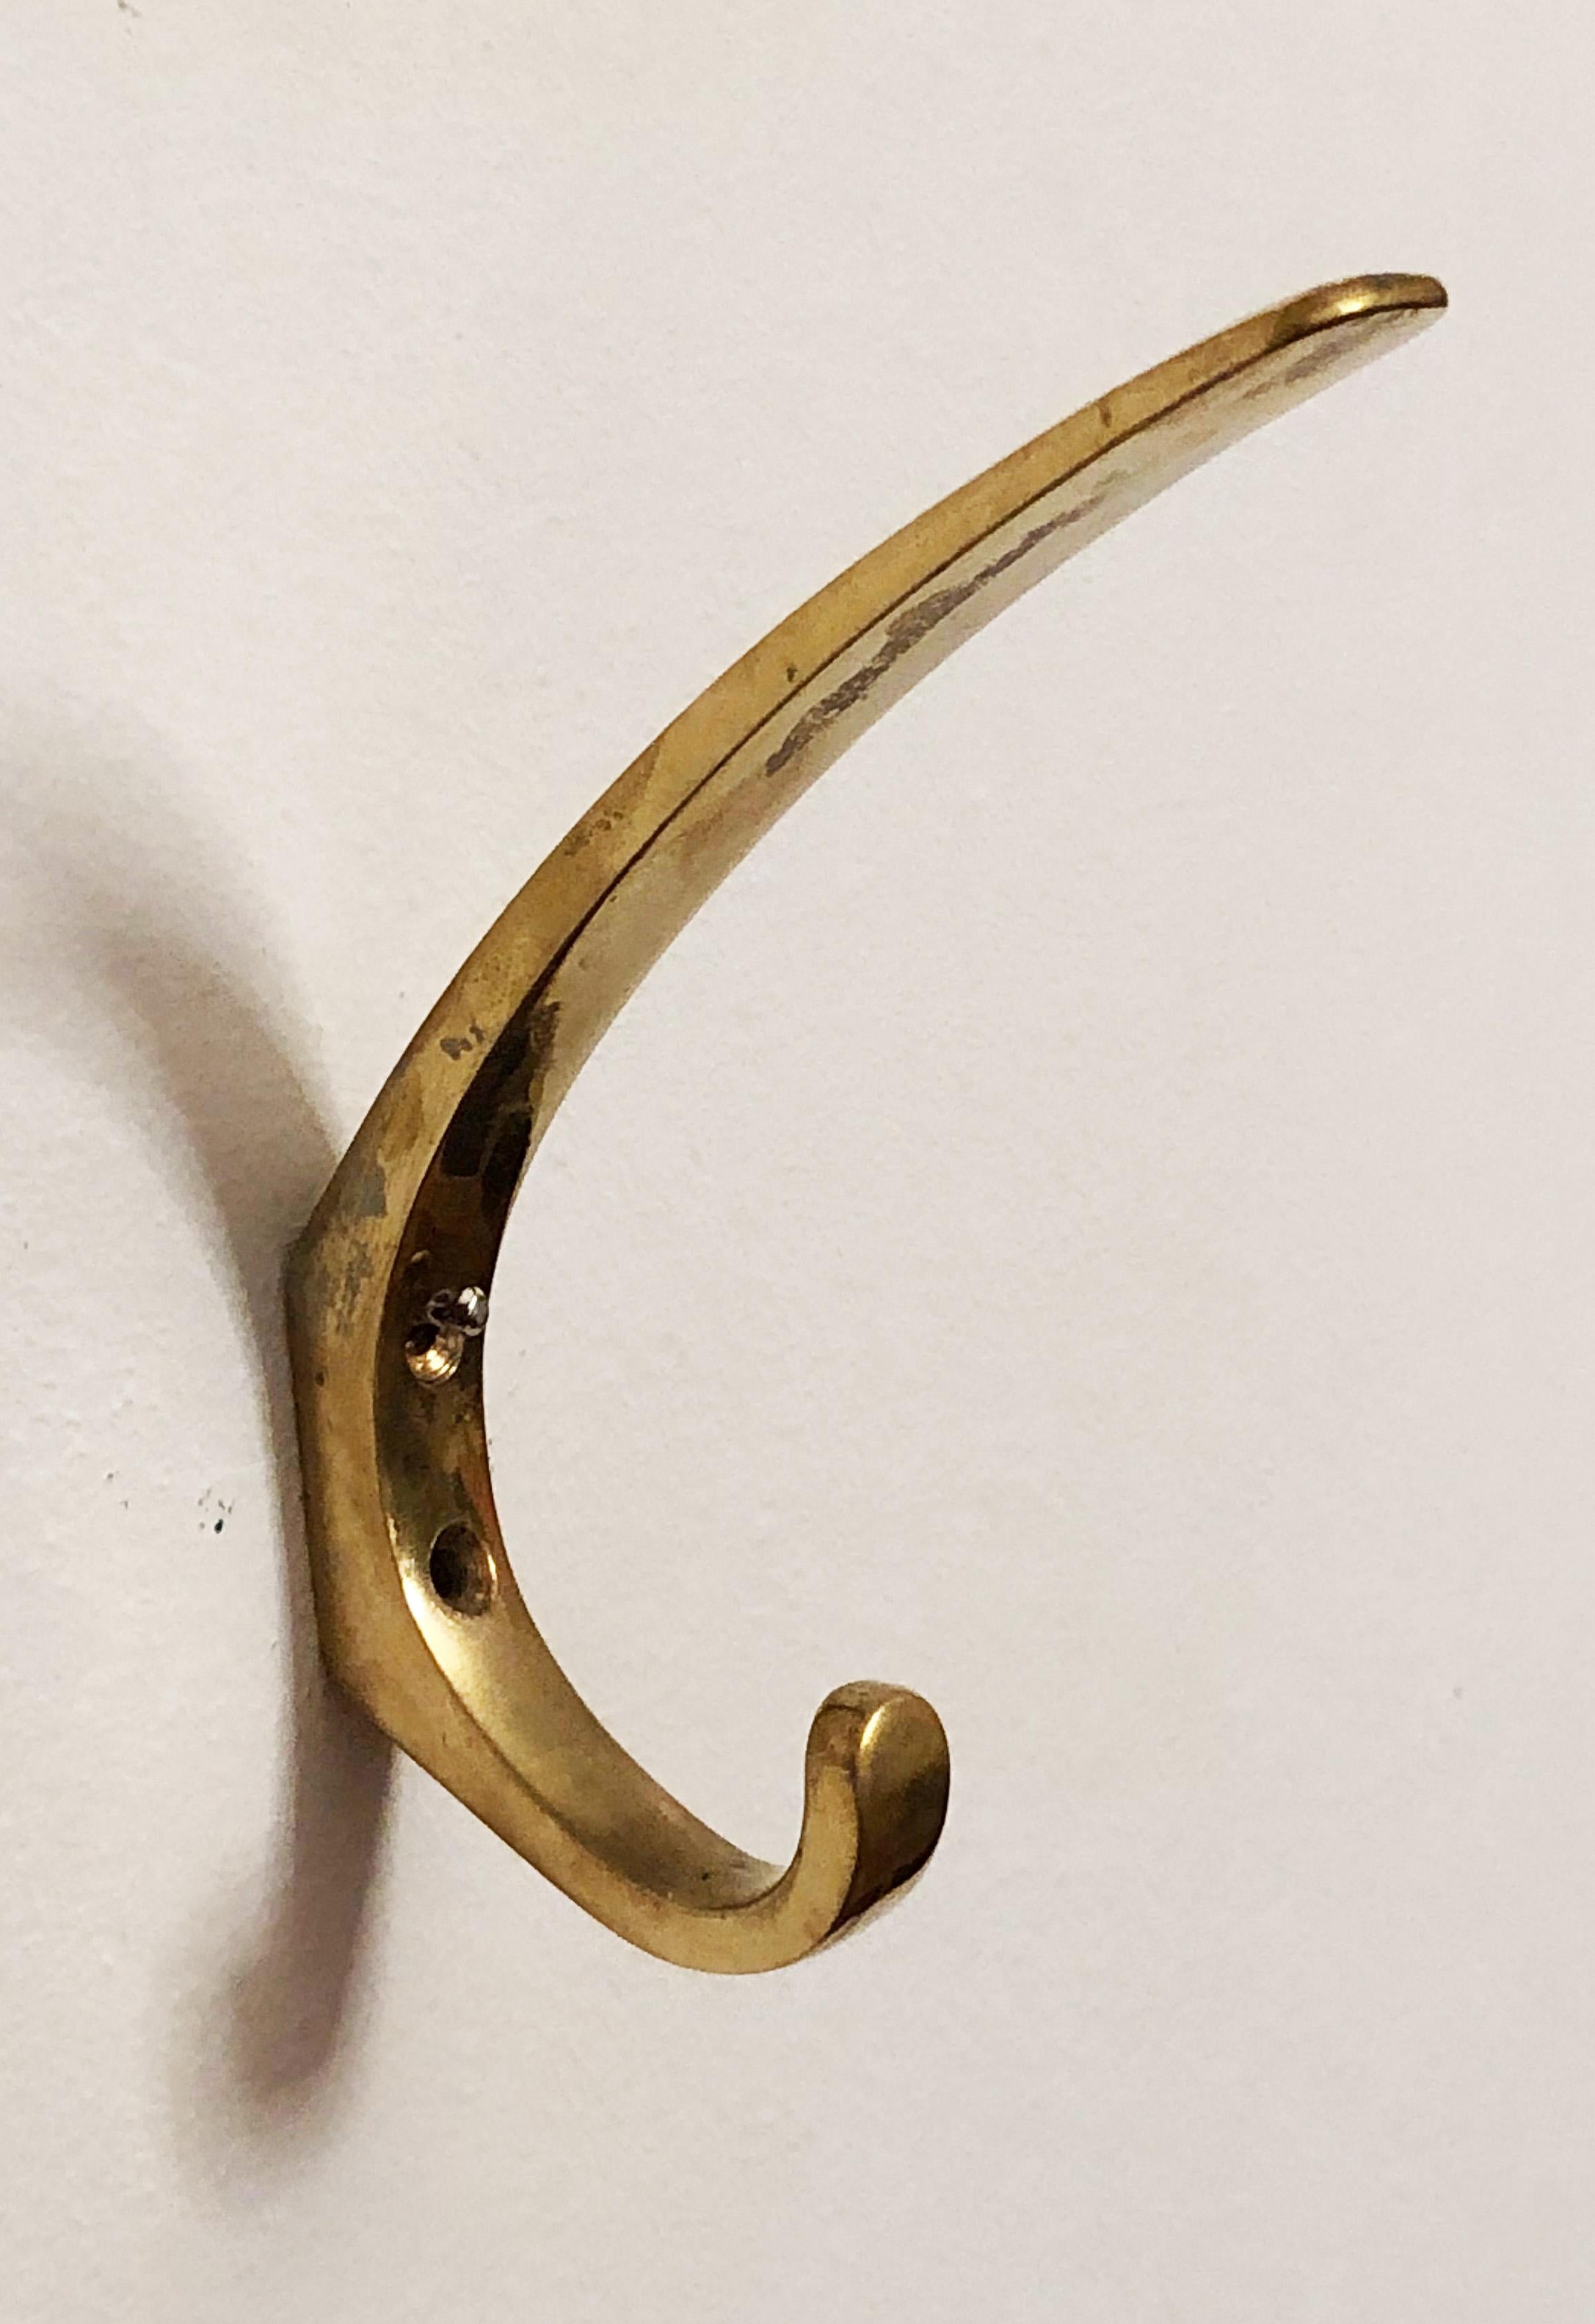 Brass coat, hat hooks, elegant shape and perfect quality by Hertha Baller from the 1950s.
 